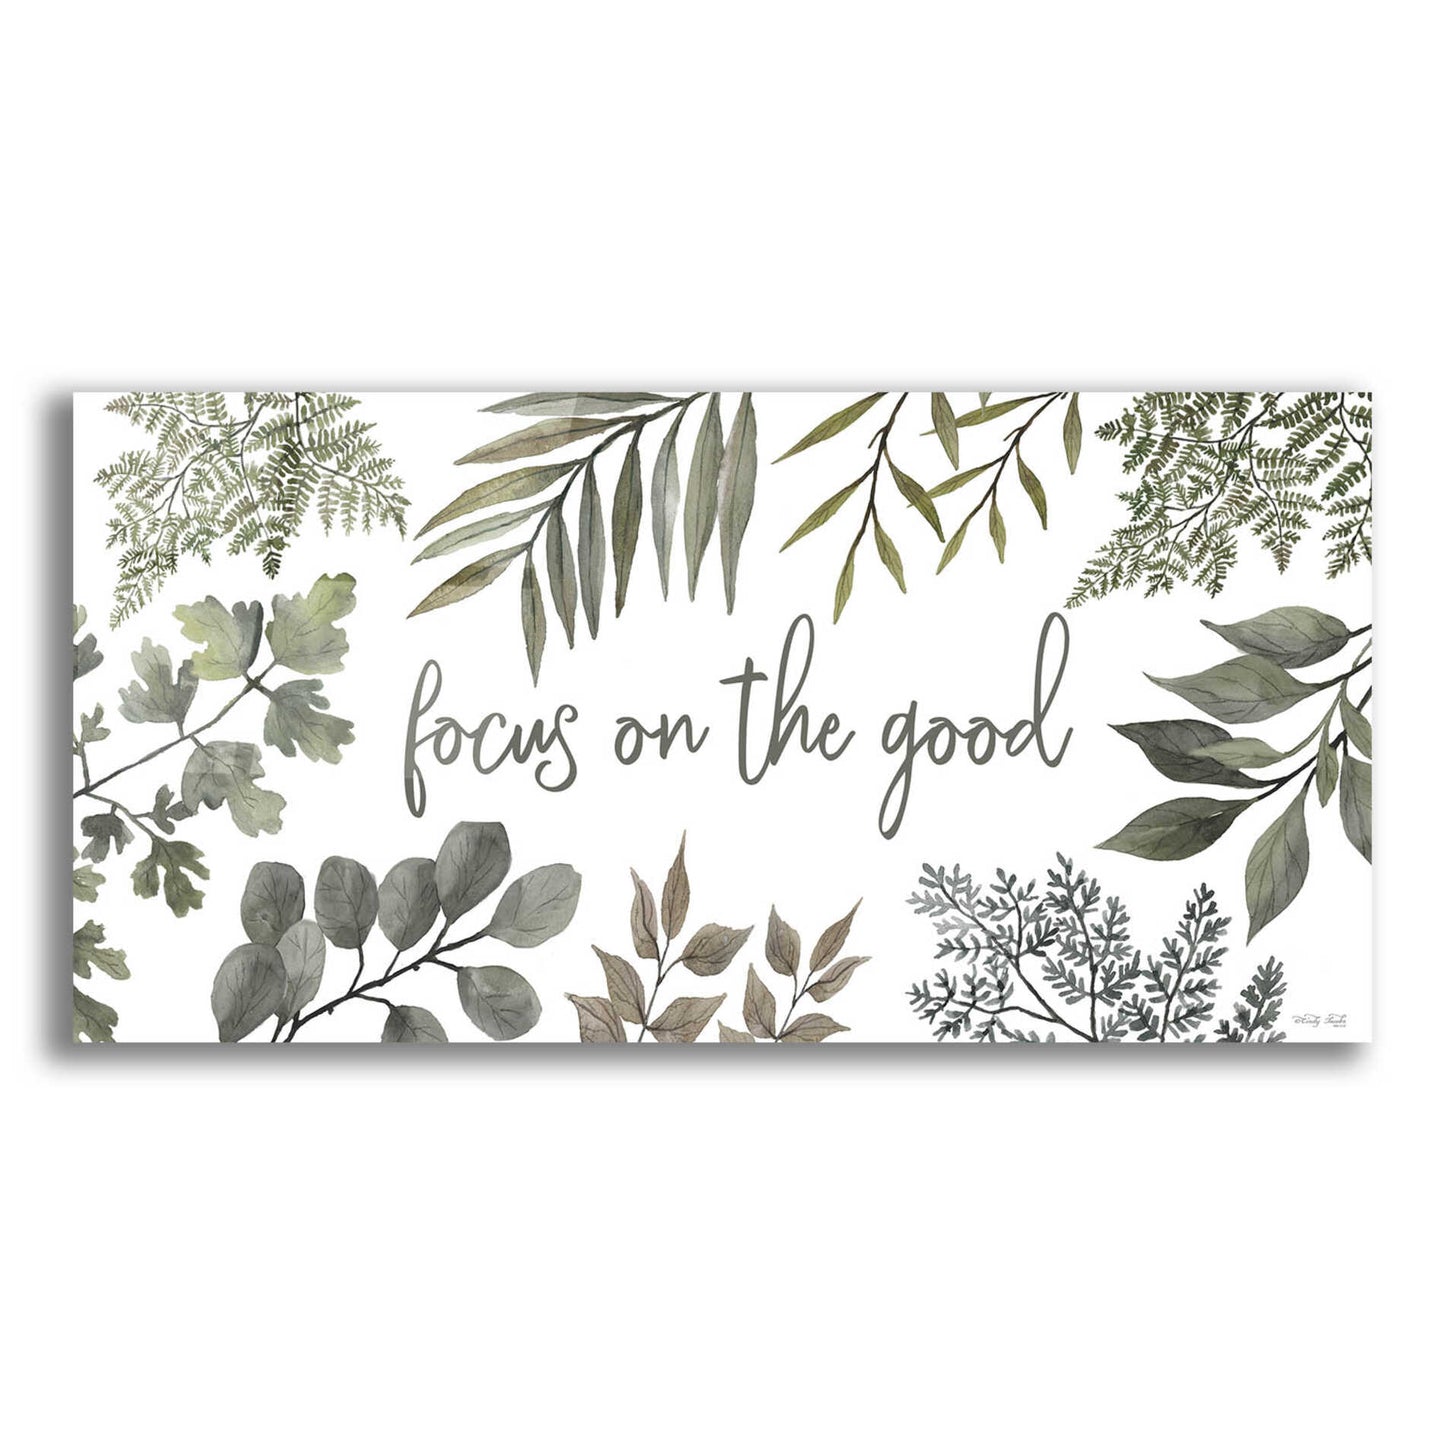 Epic Art 'Focus on the Good' by Cindy Jacobs, Acrylic Glass Wall Art